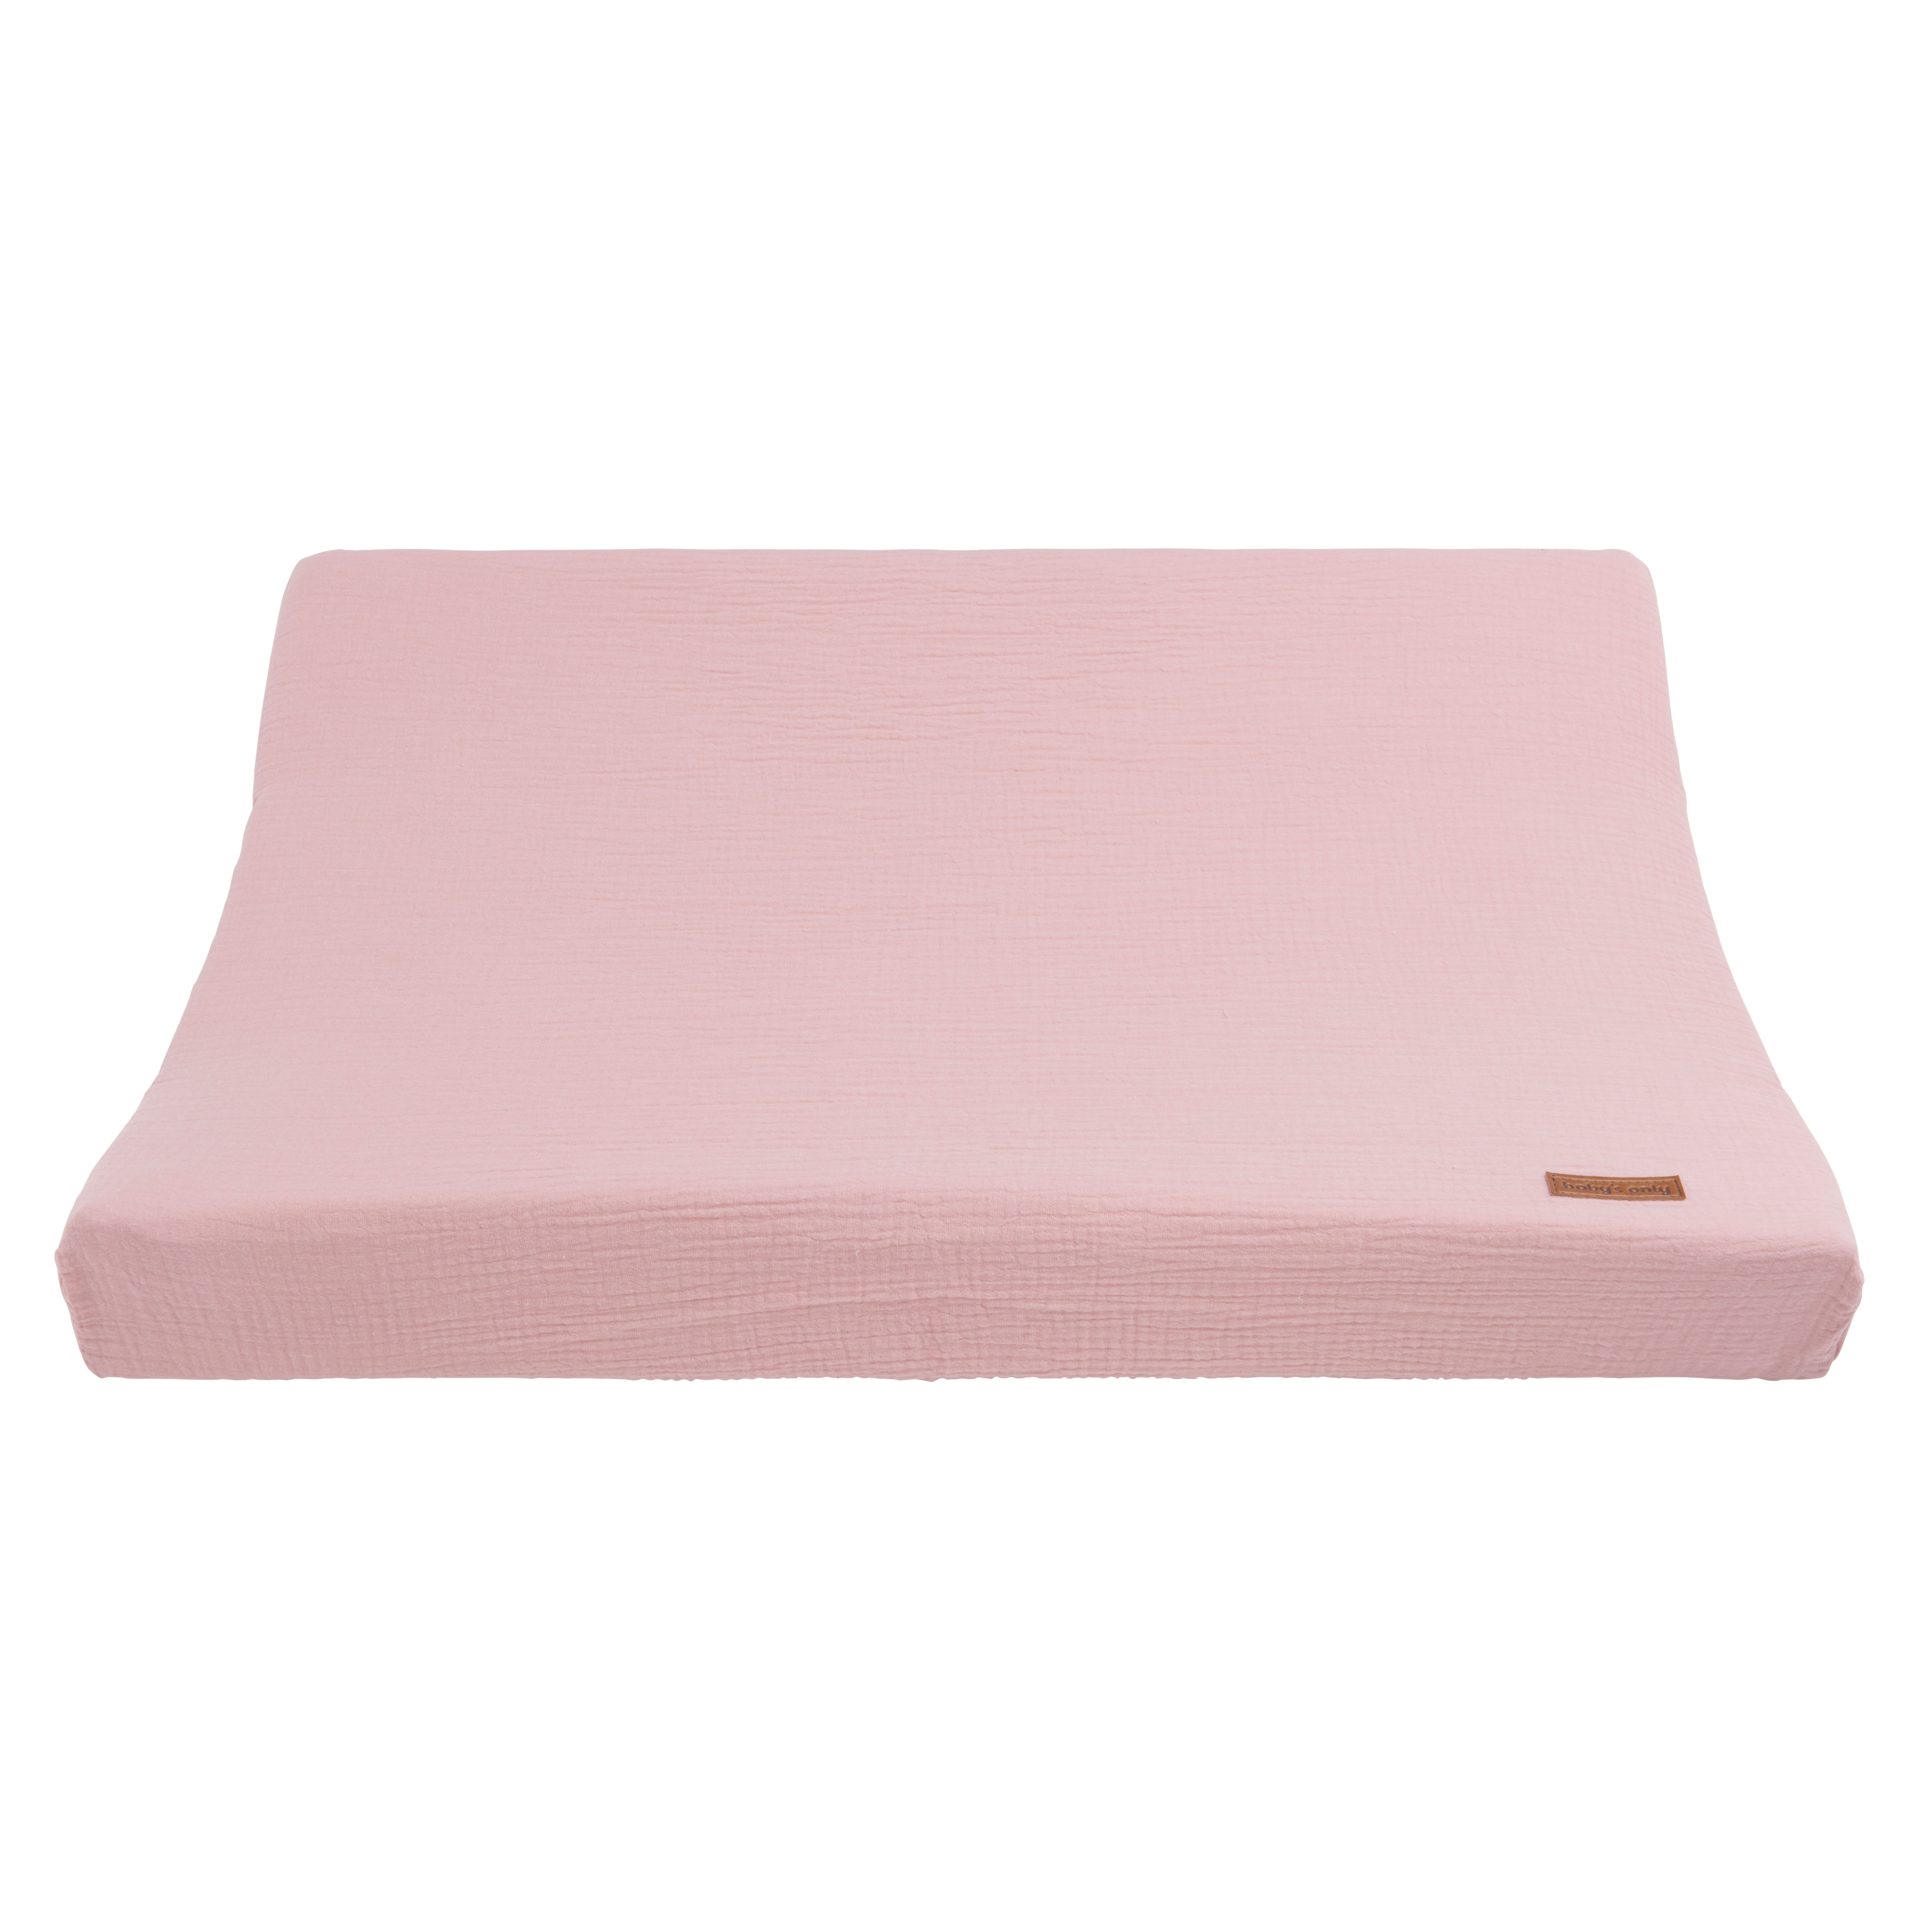 Changing pad cover Breeze old pink - 45x70